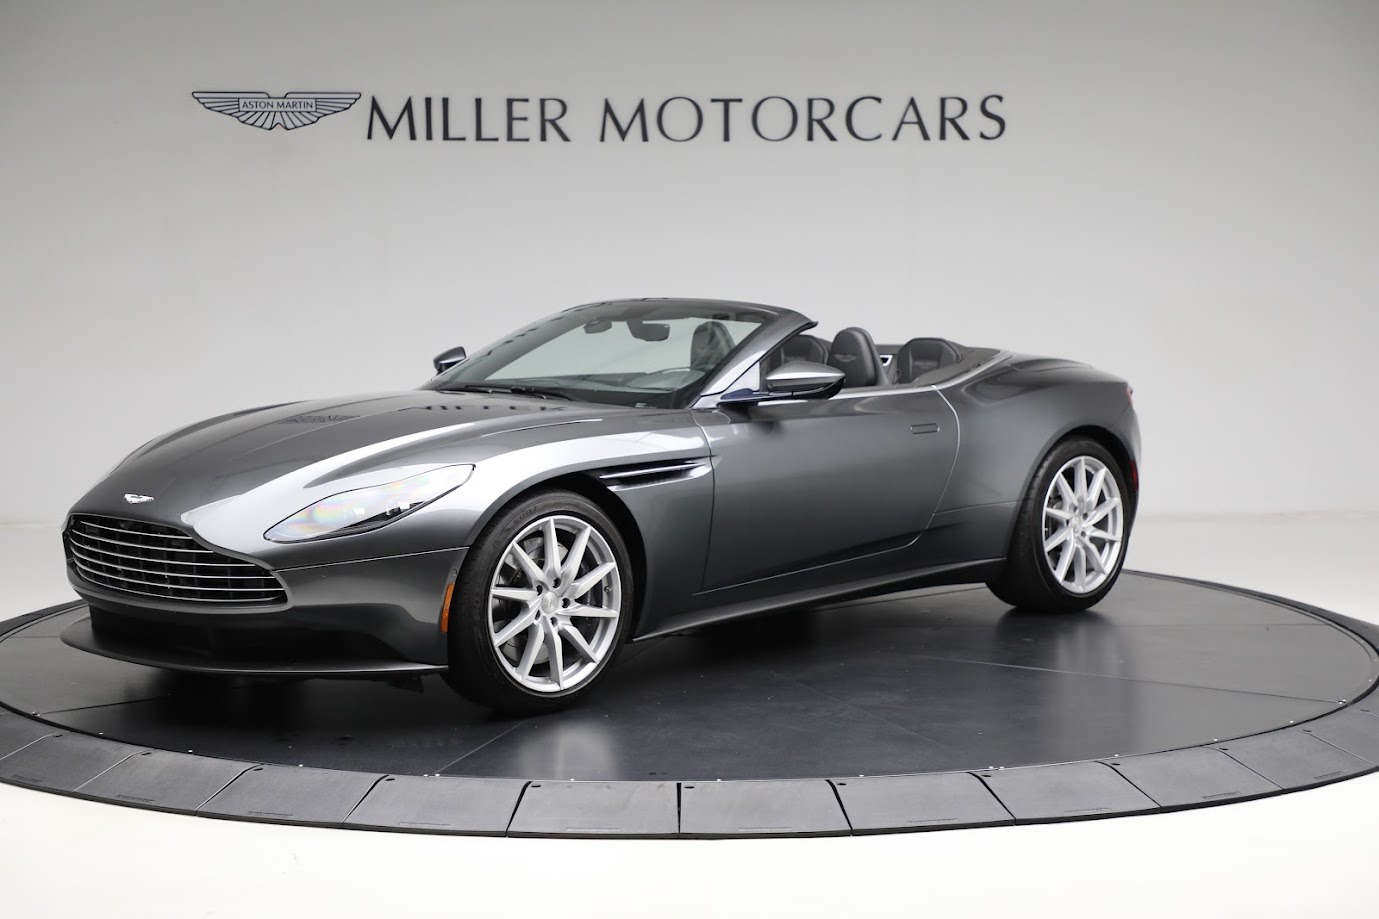 Used 2020 Aston Martin DB11 Volante for sale Sold at Maserati of Westport in Westport CT 06880 1